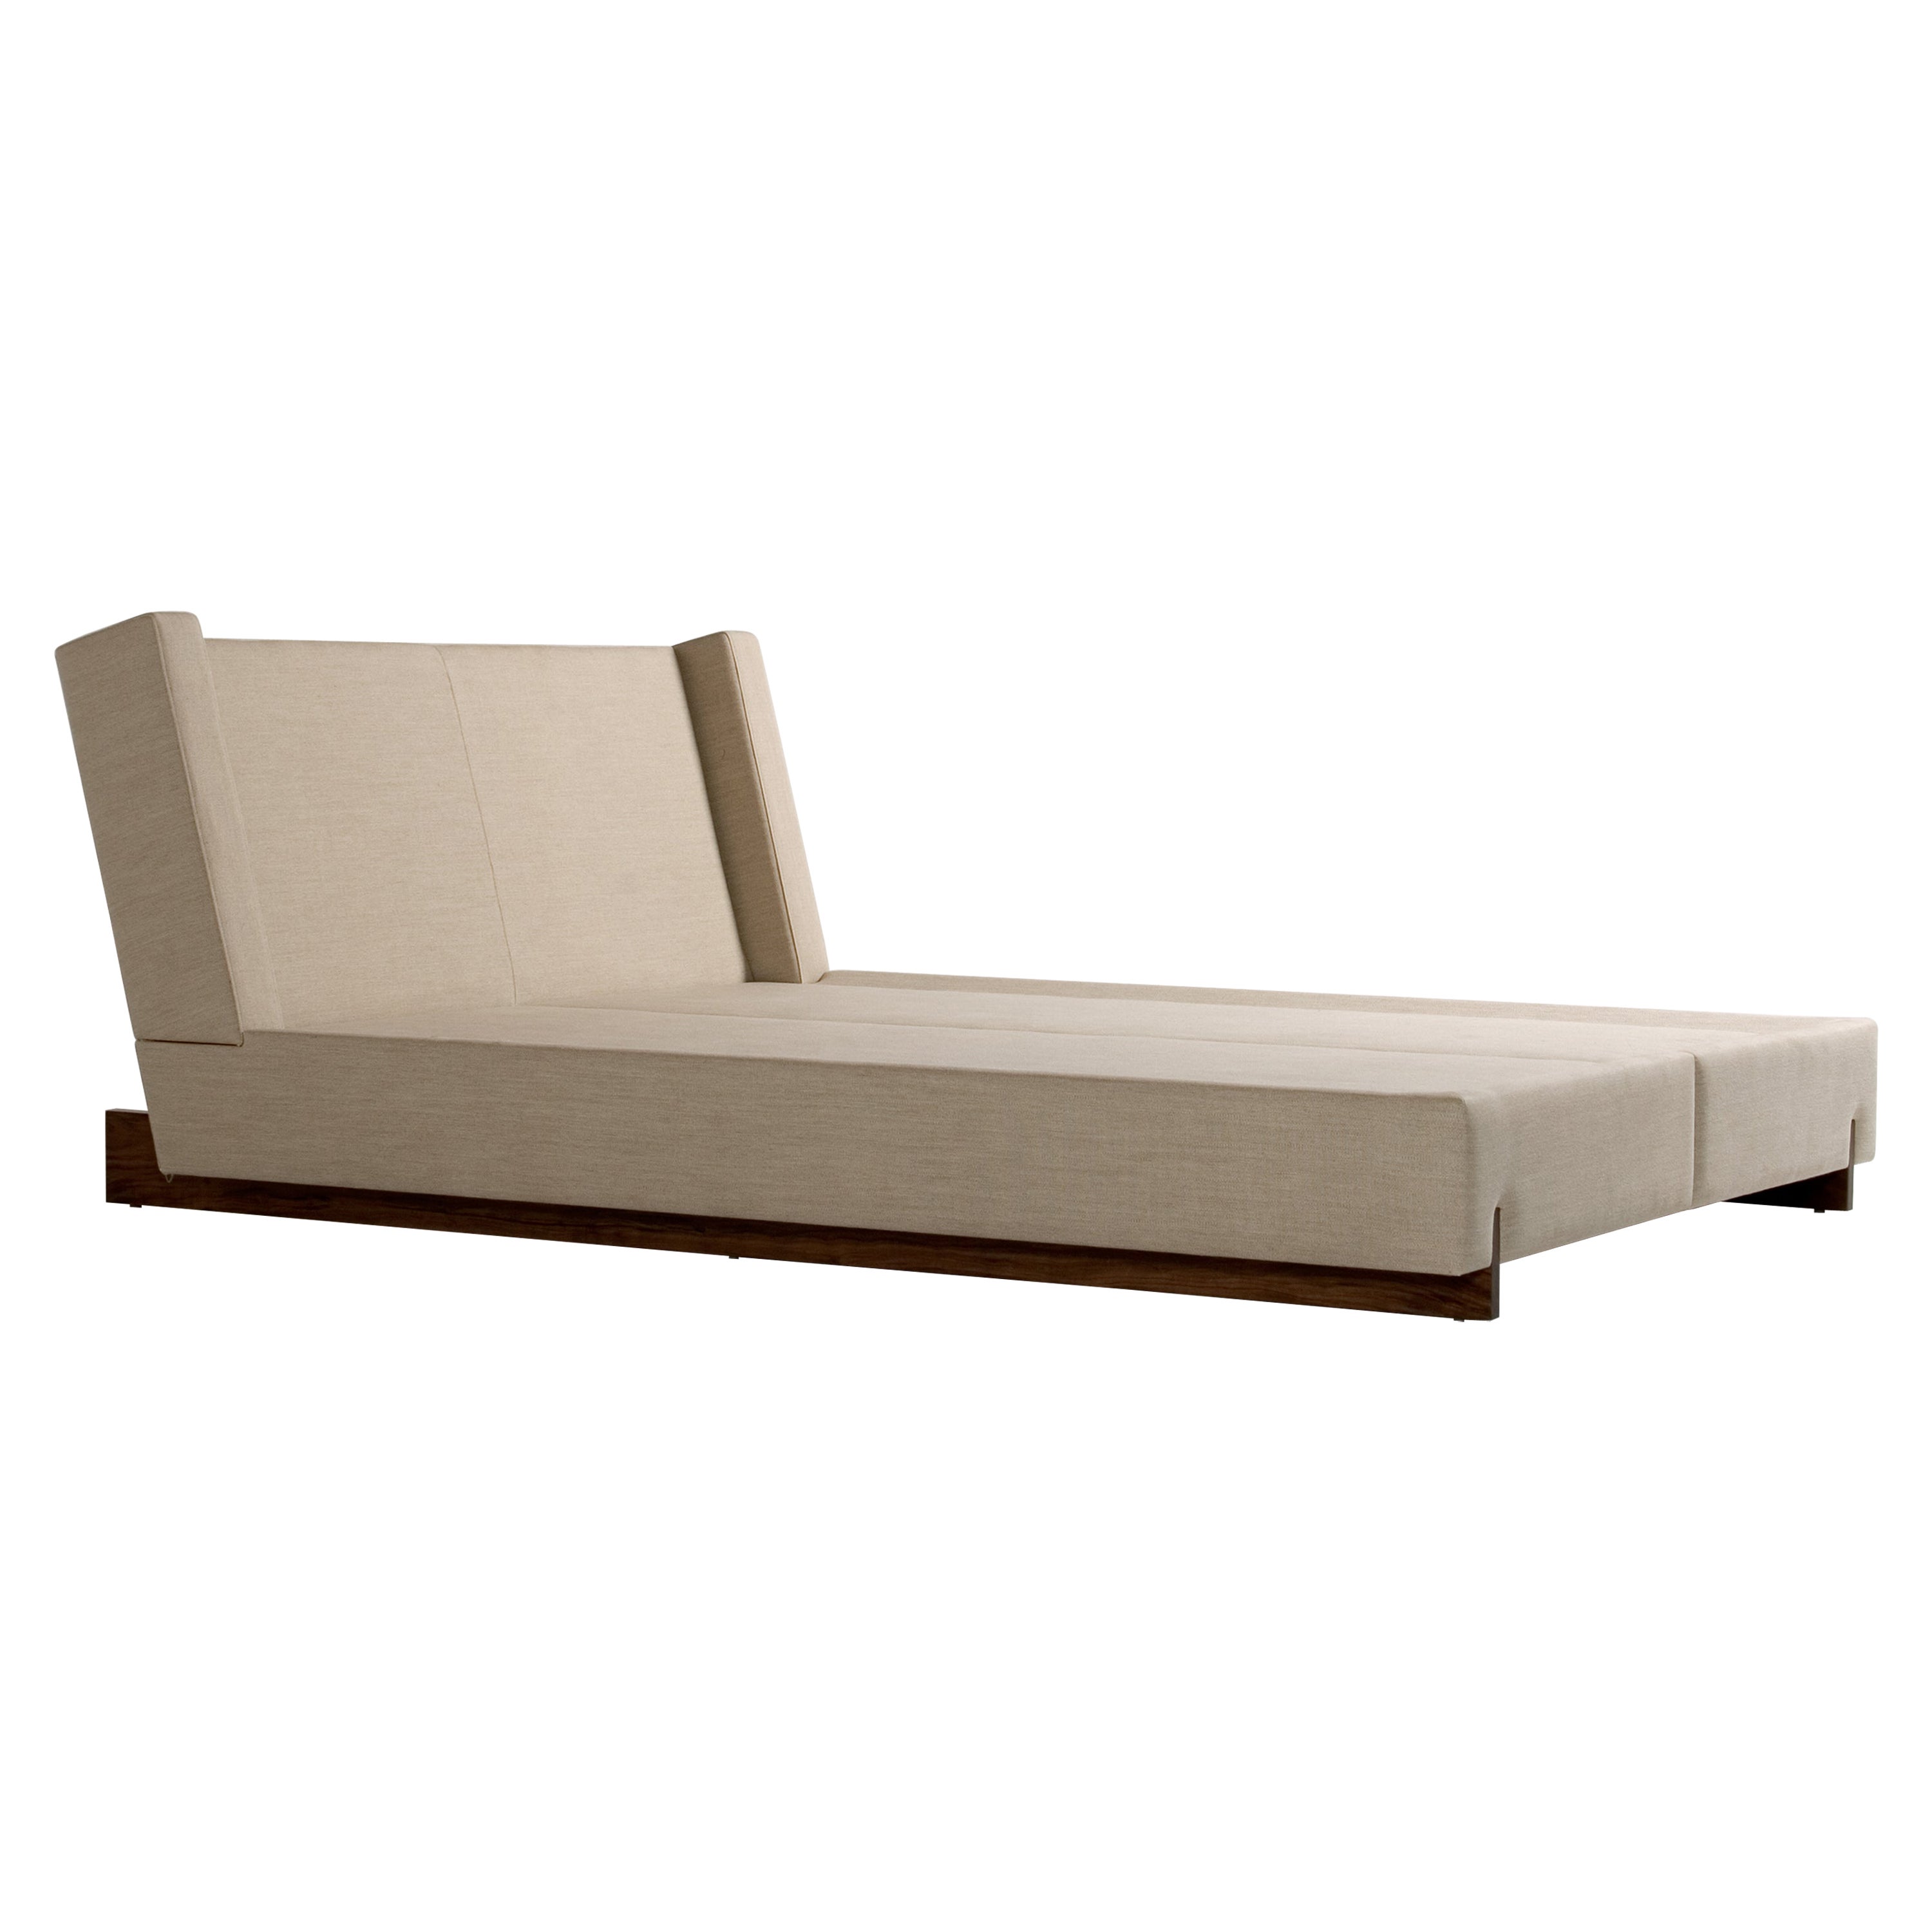 Trax Cali King Bed by Phase Design For Sale